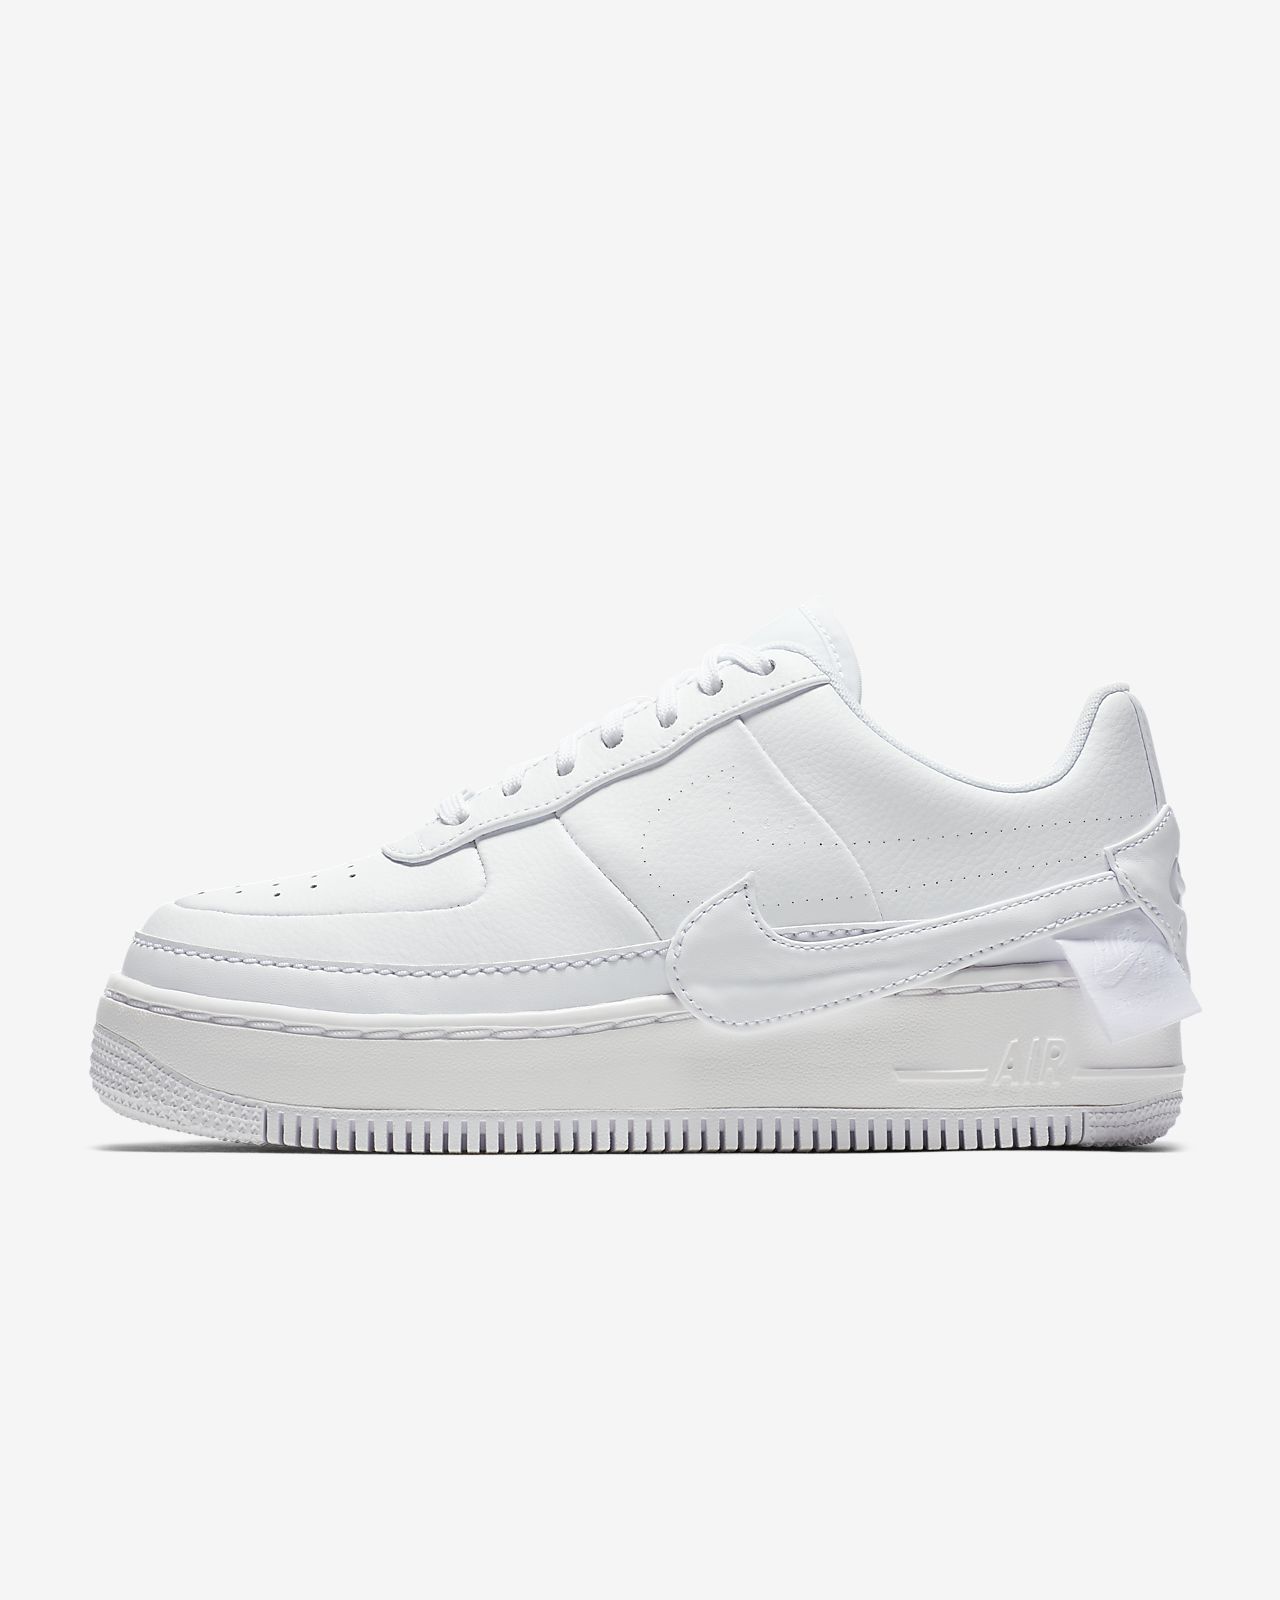 Chaussure Nike Air Force 1 Jester XX pour Femme